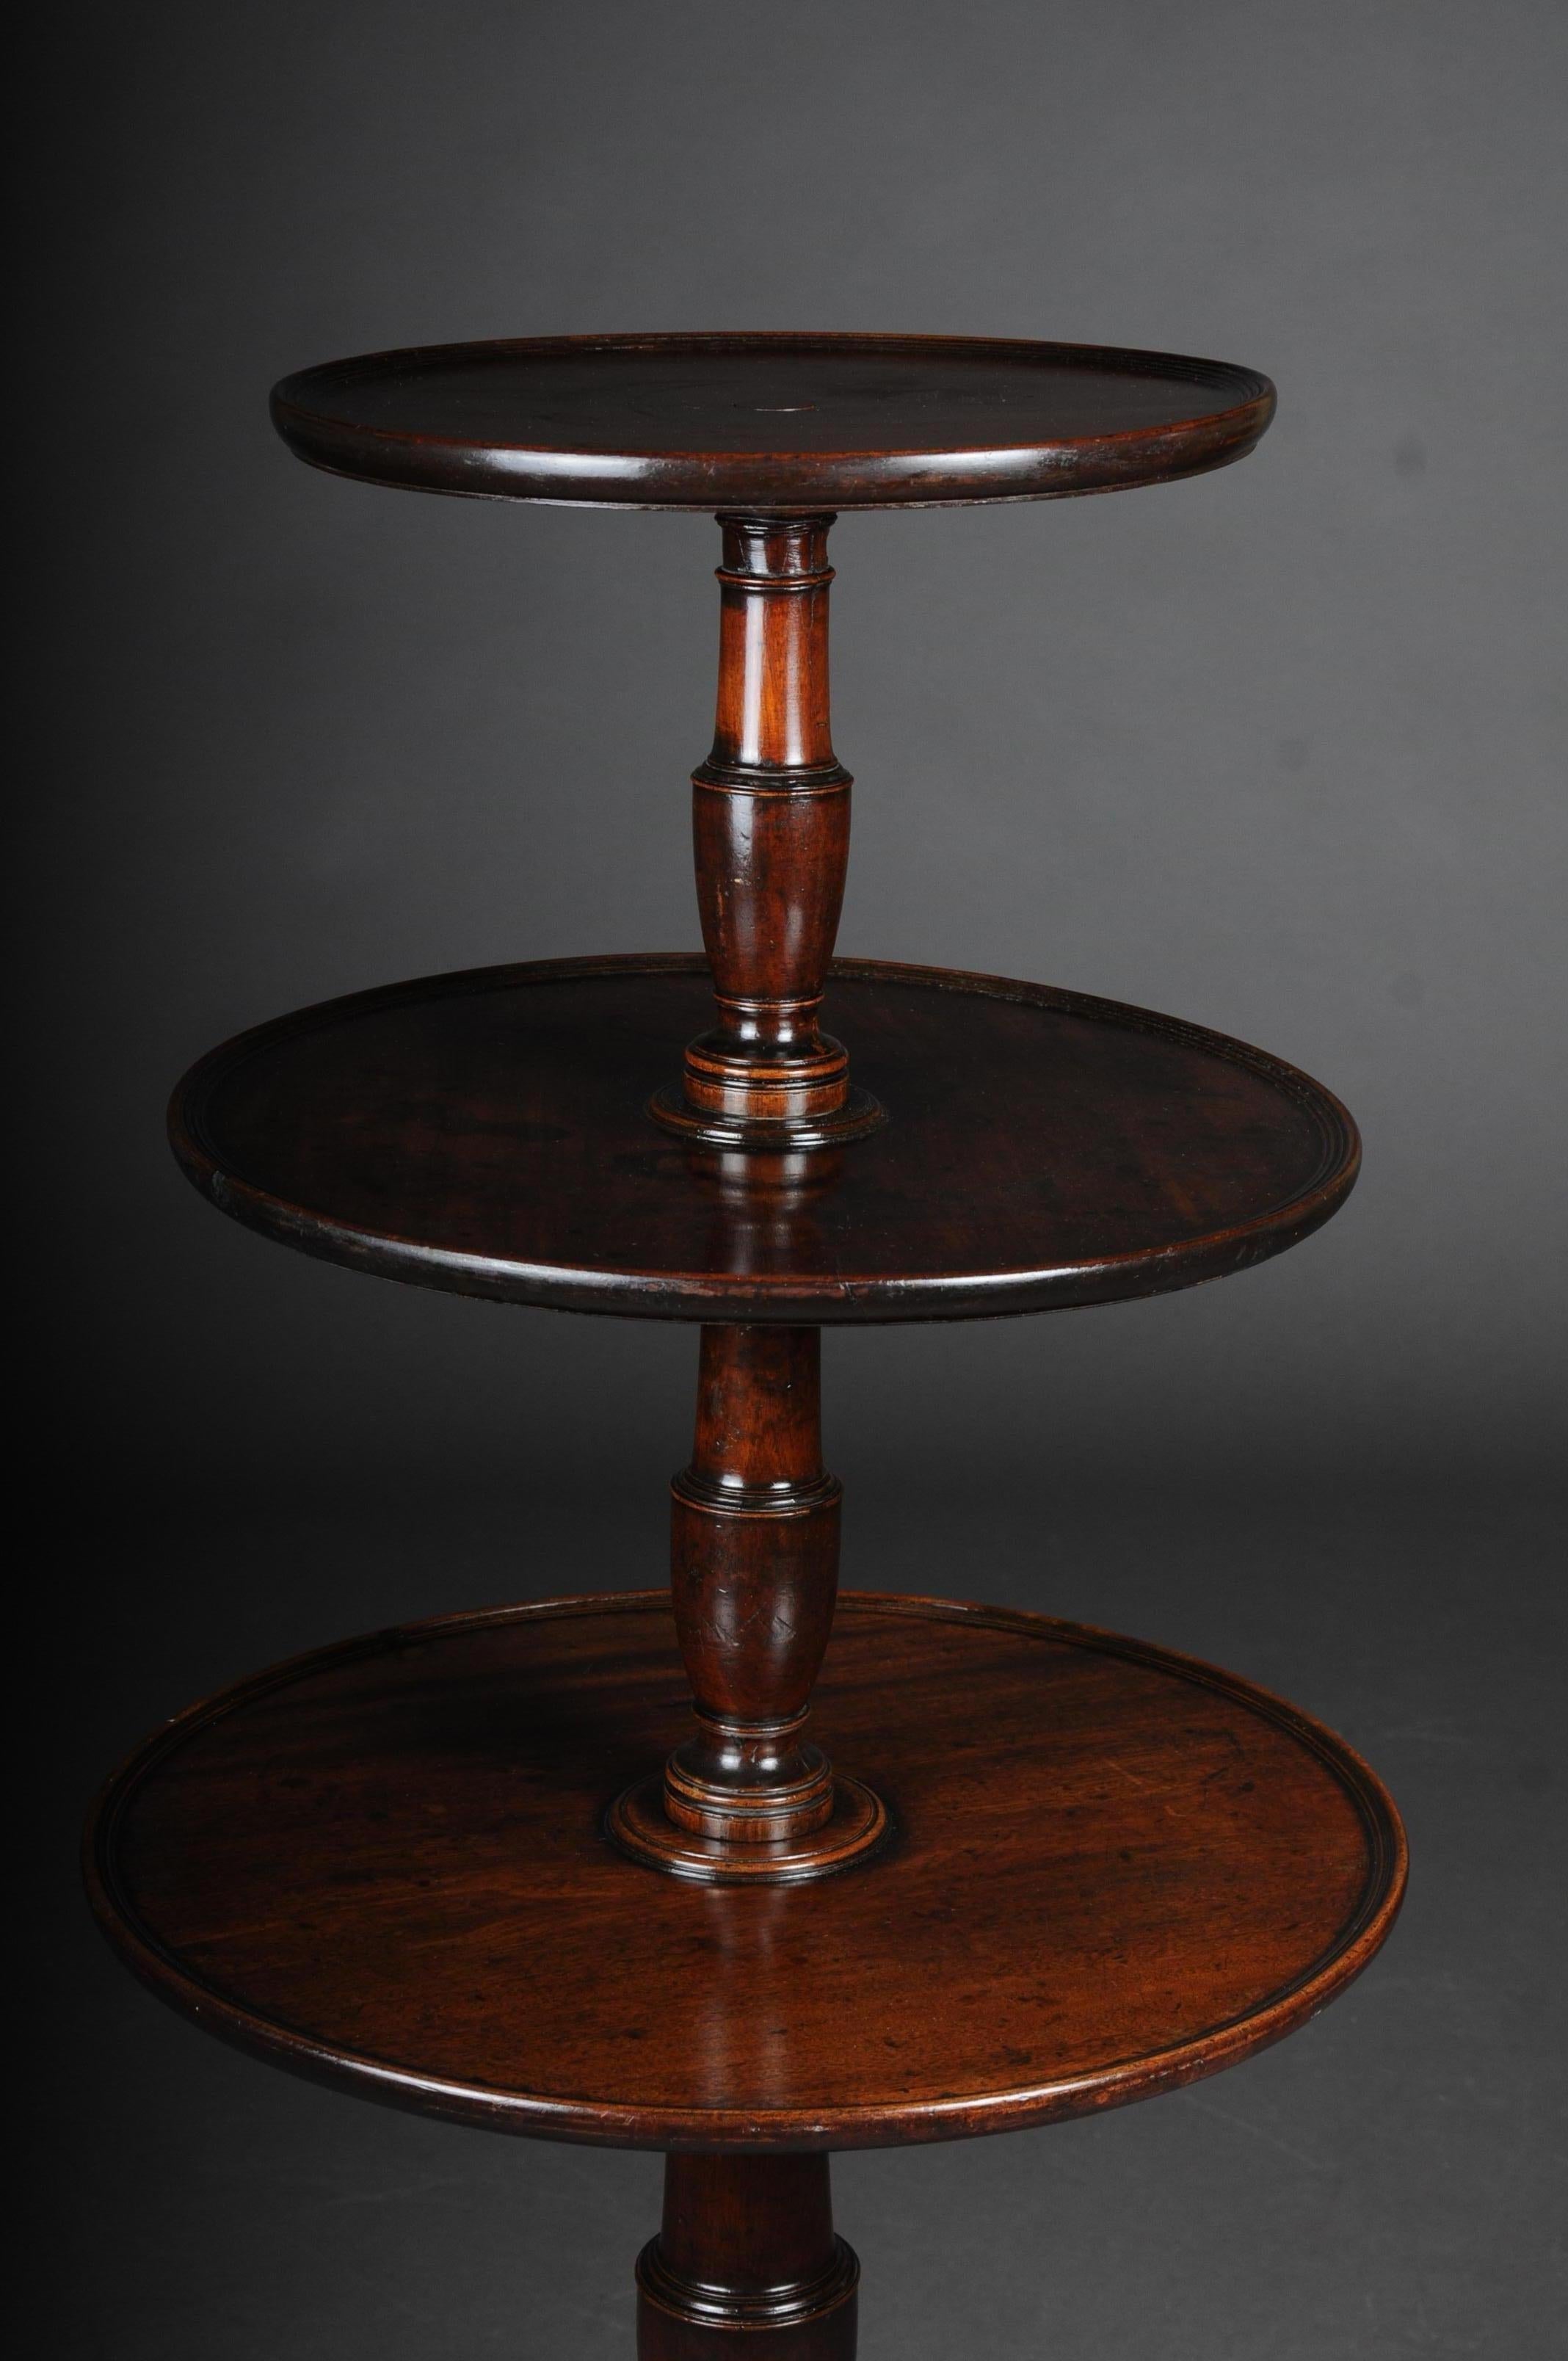 Rare English side table or étagère, Victorian 19th century mahogany

Solid mahogany wood with three-tier and round shelves. Pillar shaft, turned and also made of solid mahogany. Basalt table or étagère standing on 3 curved legs with caster feet